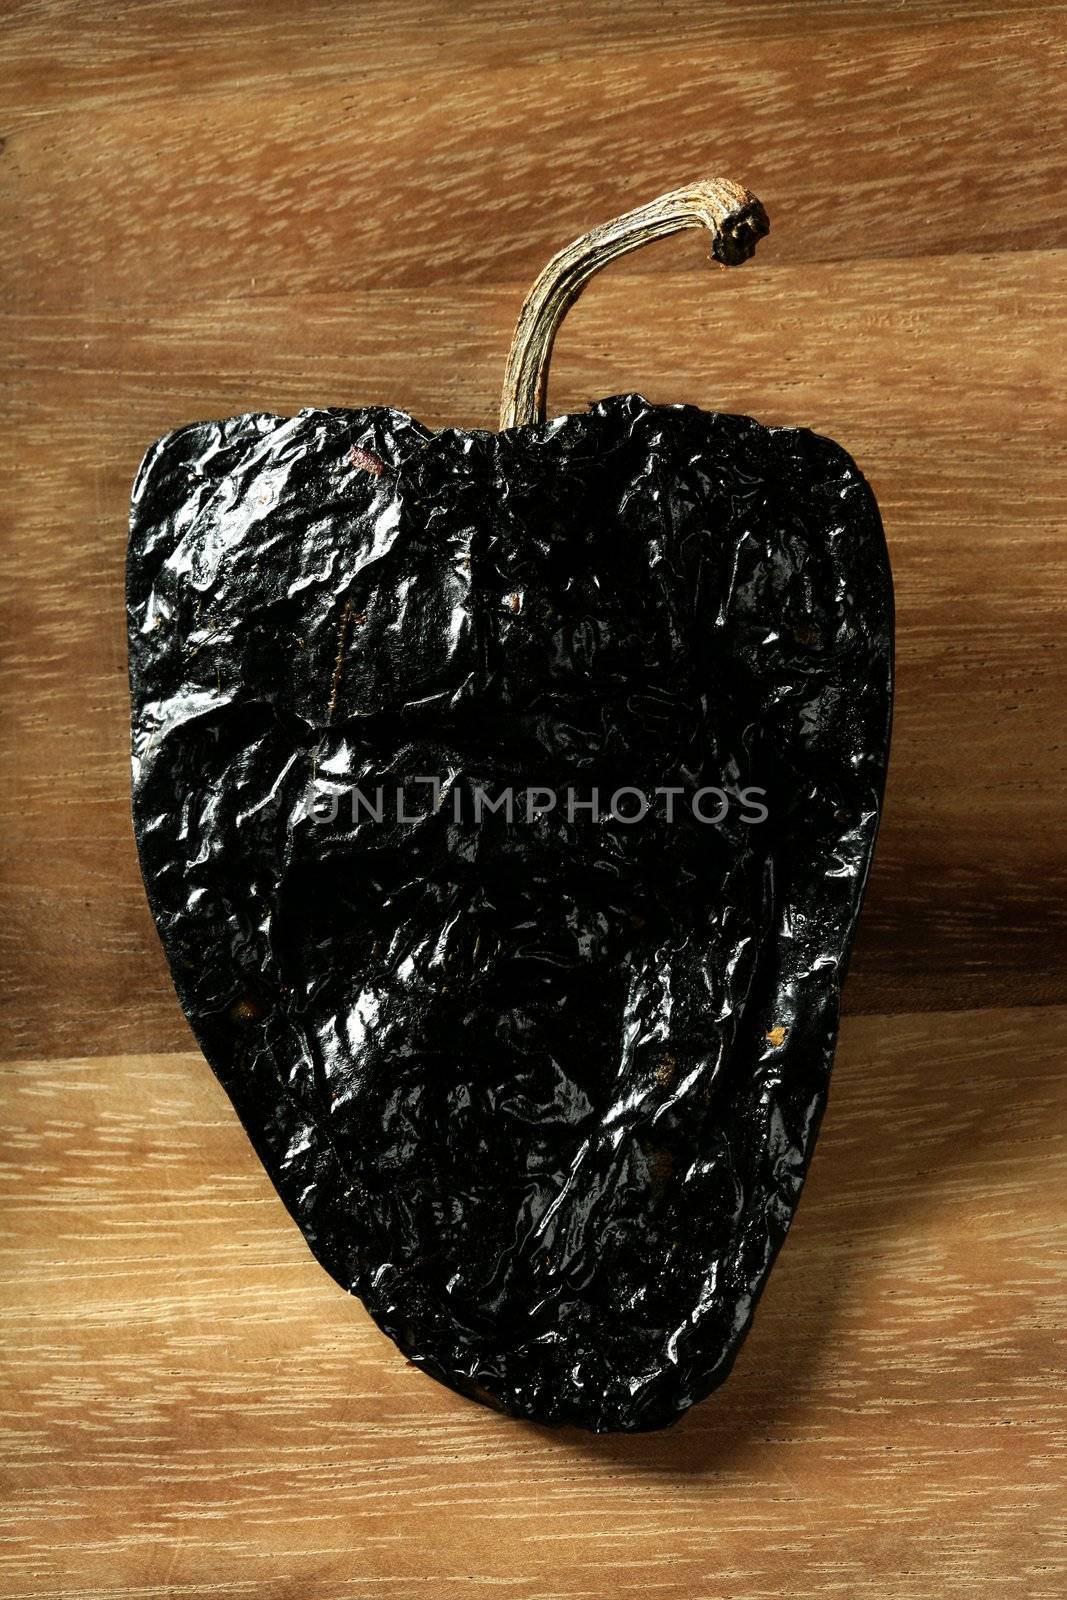 One black mexican dried chili pepper still on warm wood background